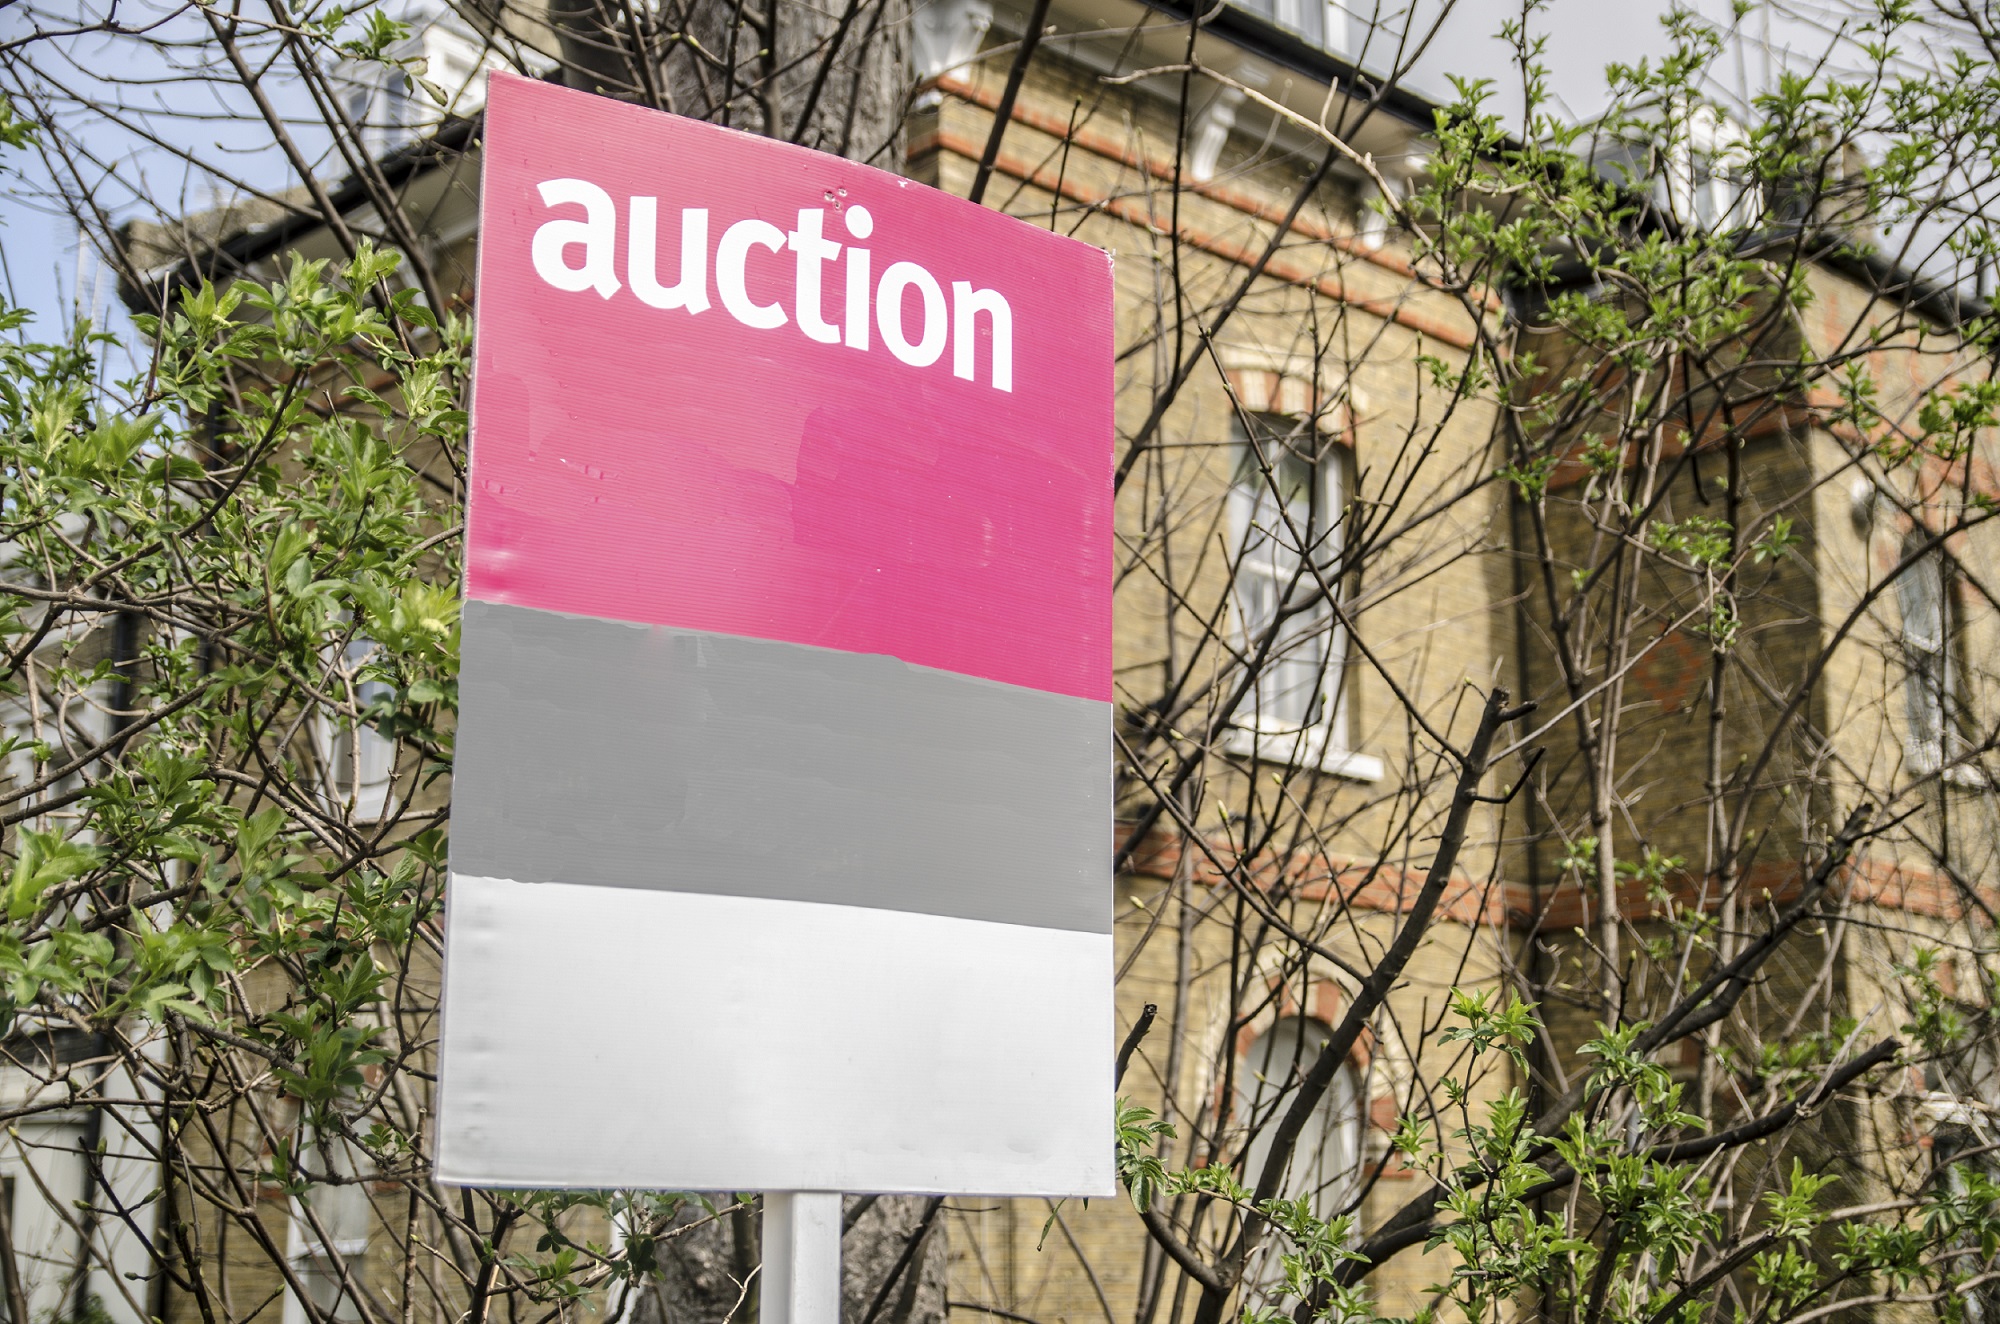 Buying or selling at an auction